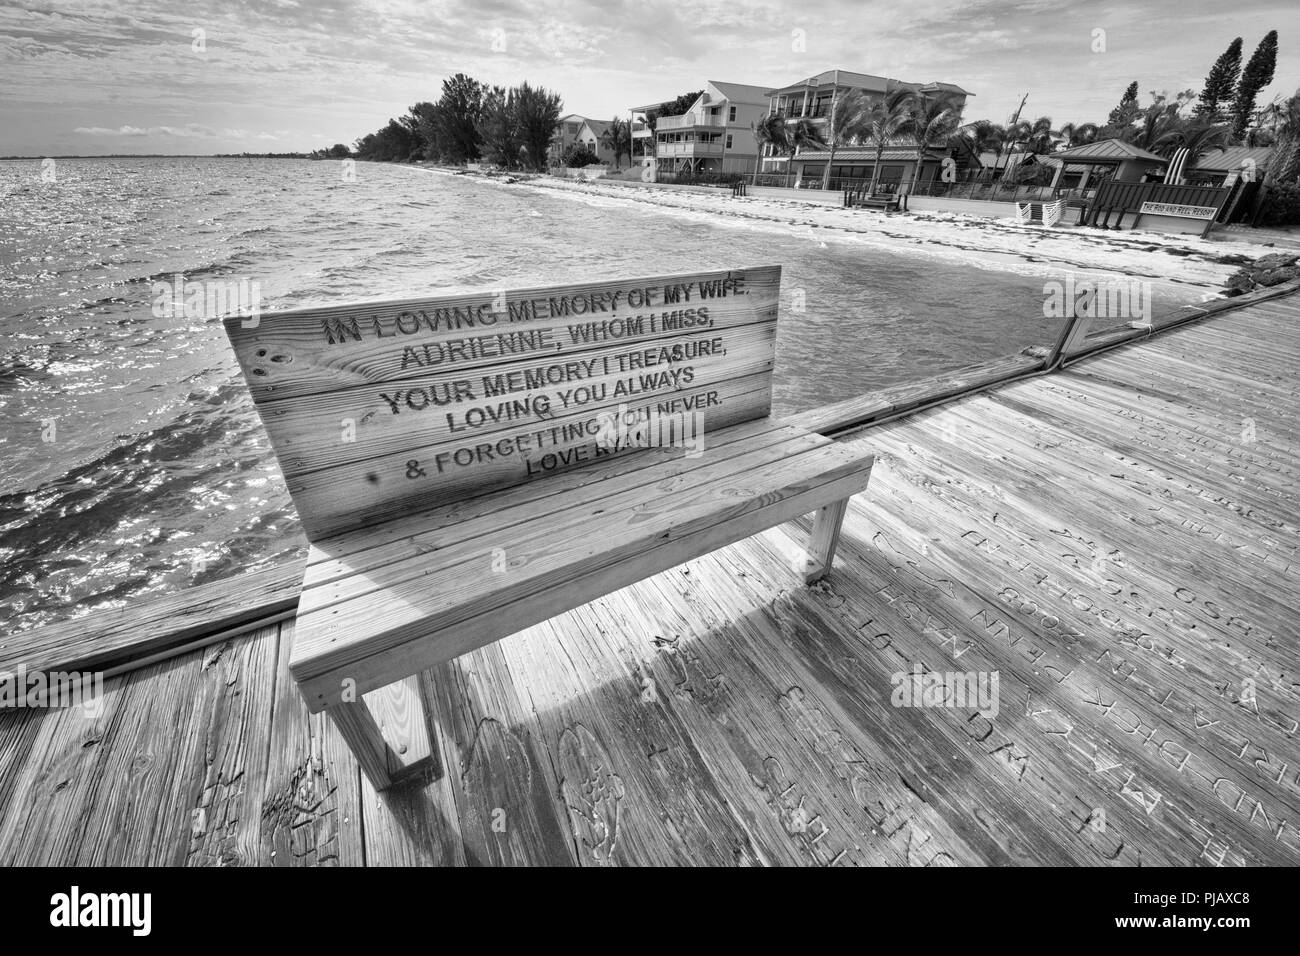 A memorial bench at the Rod and Reel Pier, a popular tourist attraction in picturesque Anna Maria Island, on the Gulf cost of Florida, USA Stock Photo